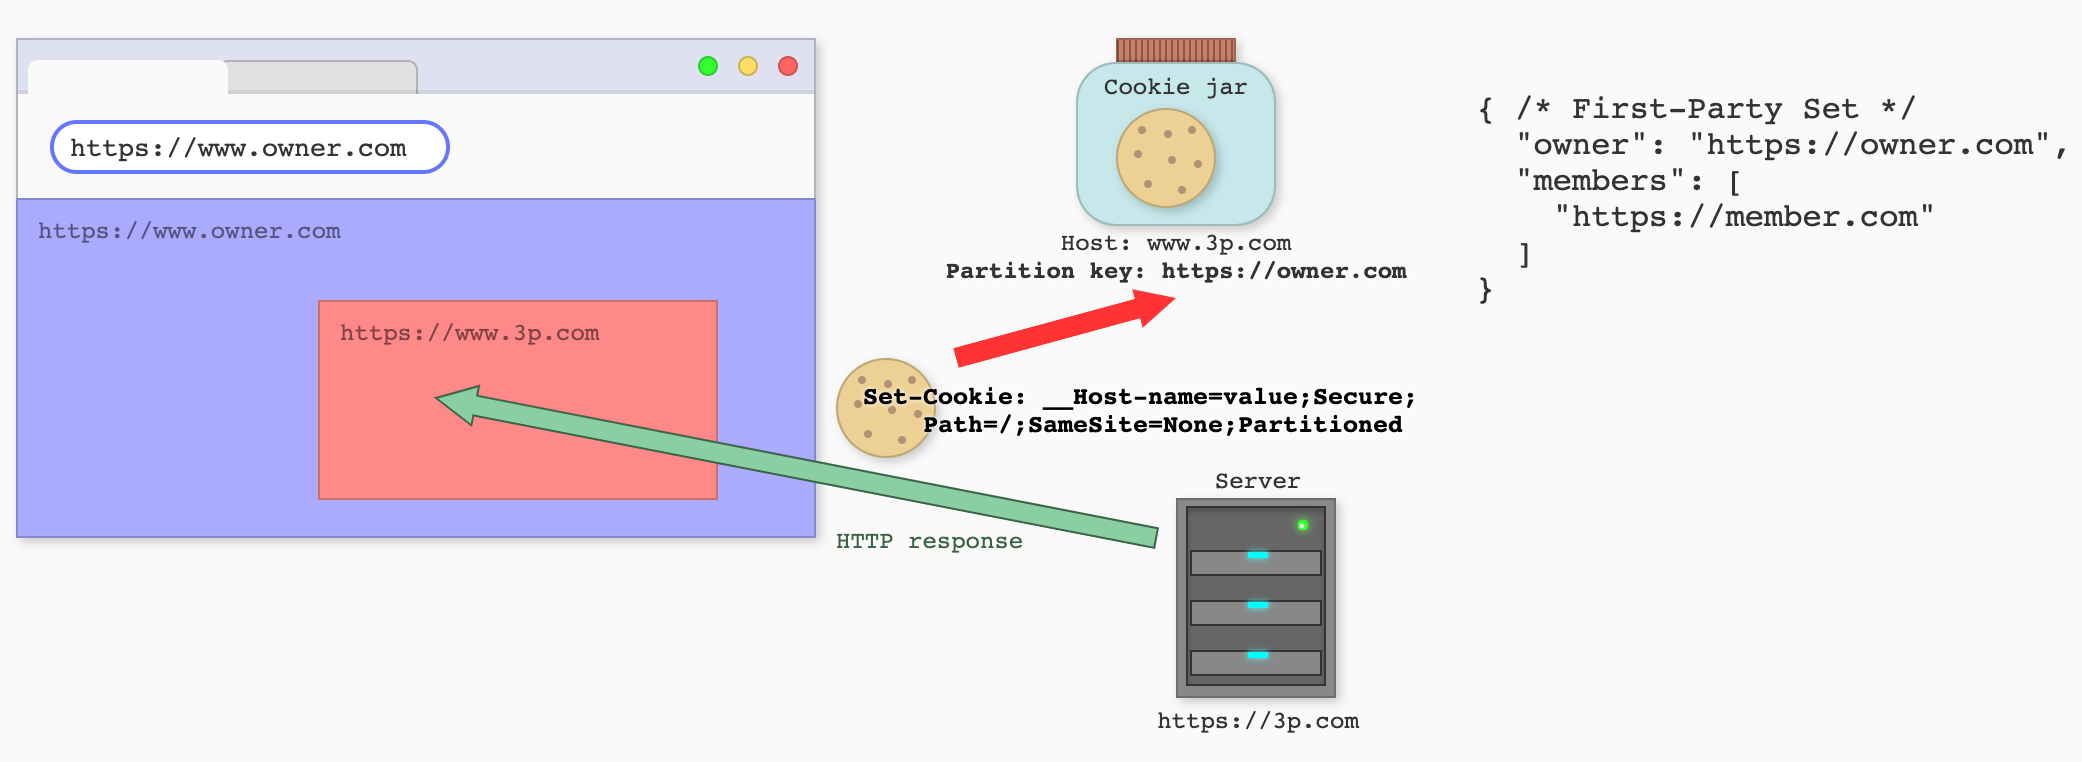 A third party sets a Partitioned cookie while embedded on a site in a First-Party Set.